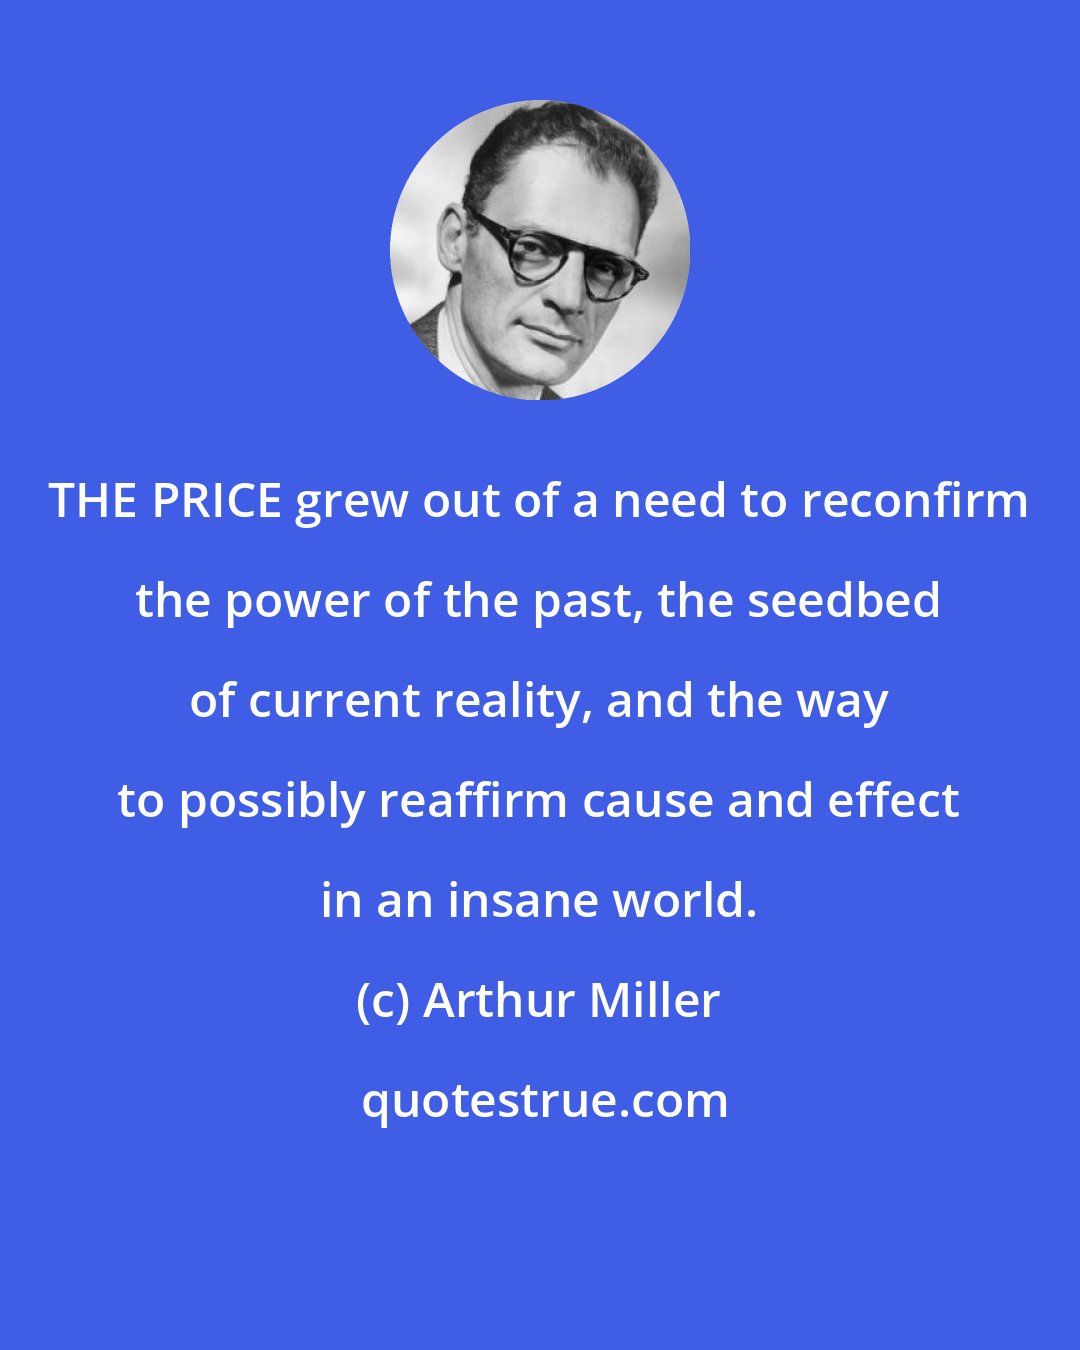 Arthur Miller: THE PRICE grew out of a need to reconfirm the power of the past, the seedbed of current reality, and the way to possibly reaffirm cause and effect in an insane world.